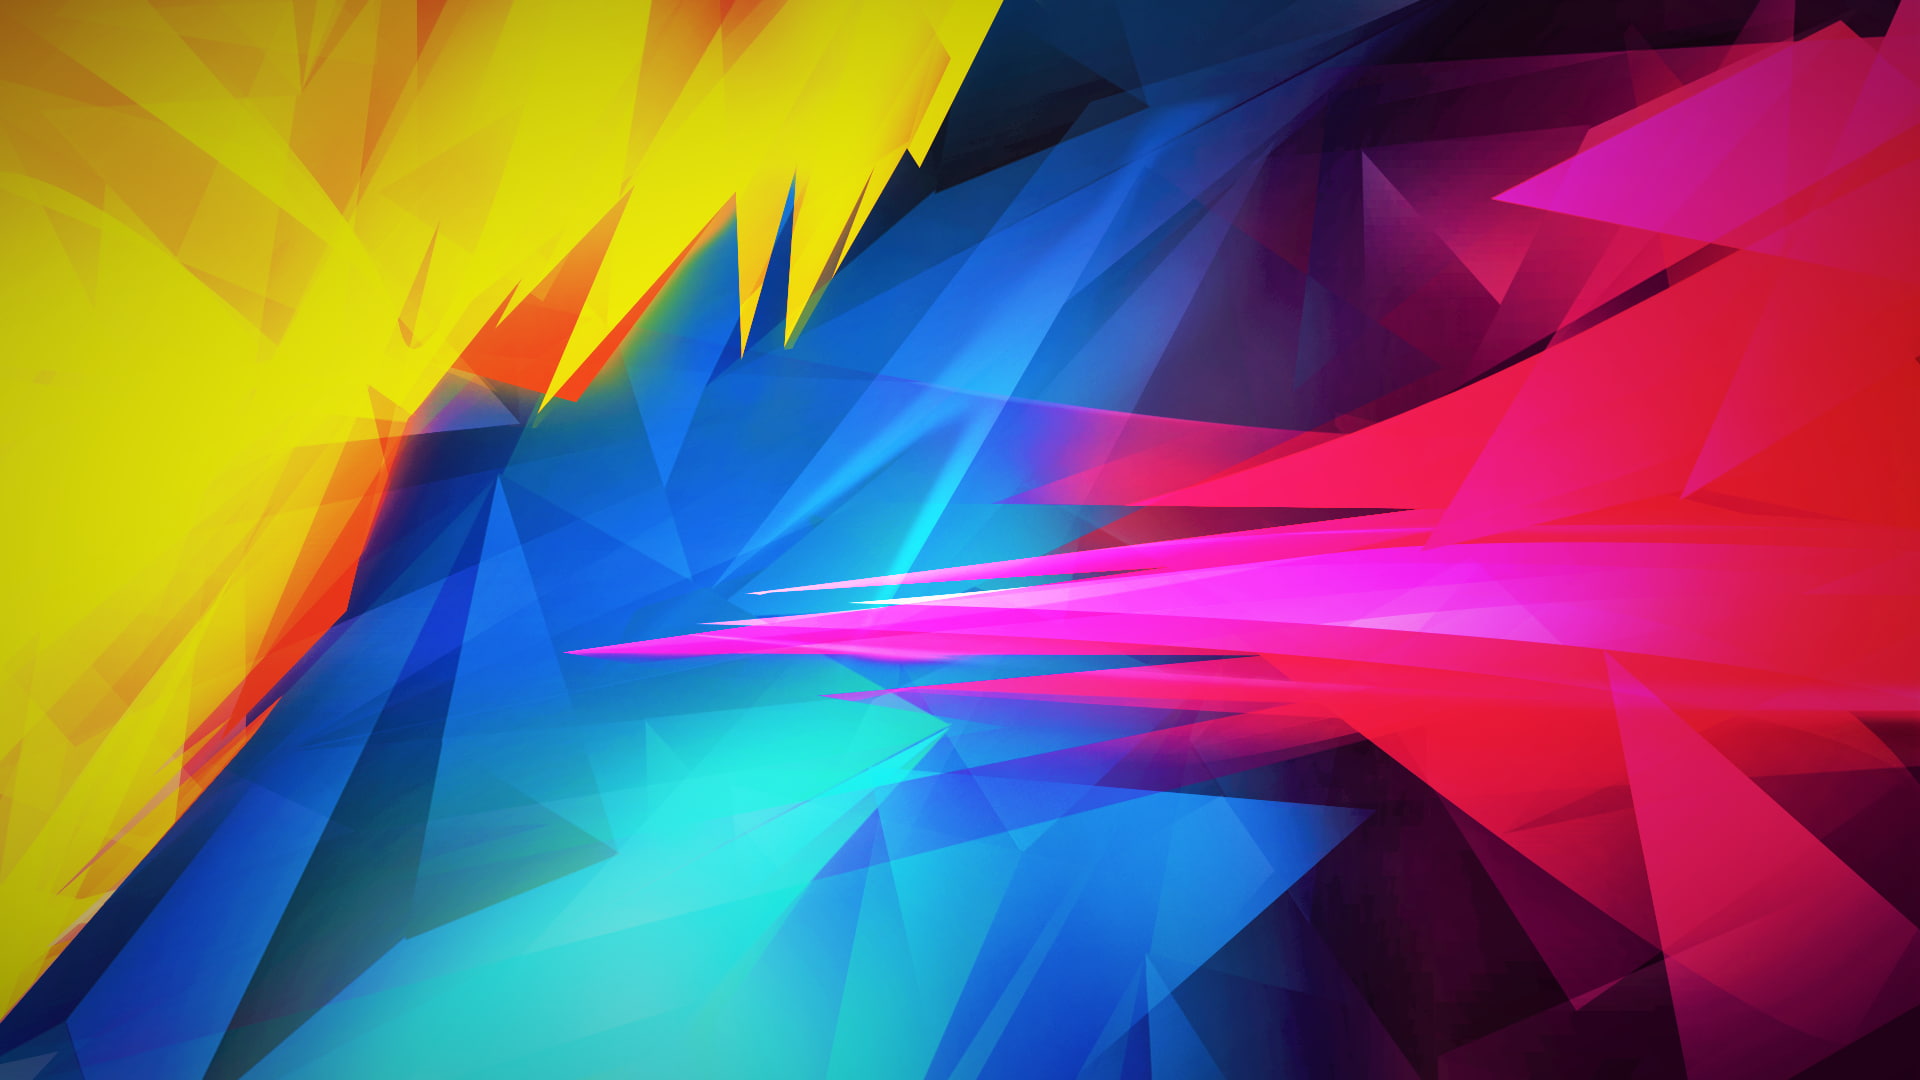 Red Blue Yellow Abstract - 1920x1080 Wallpaper 